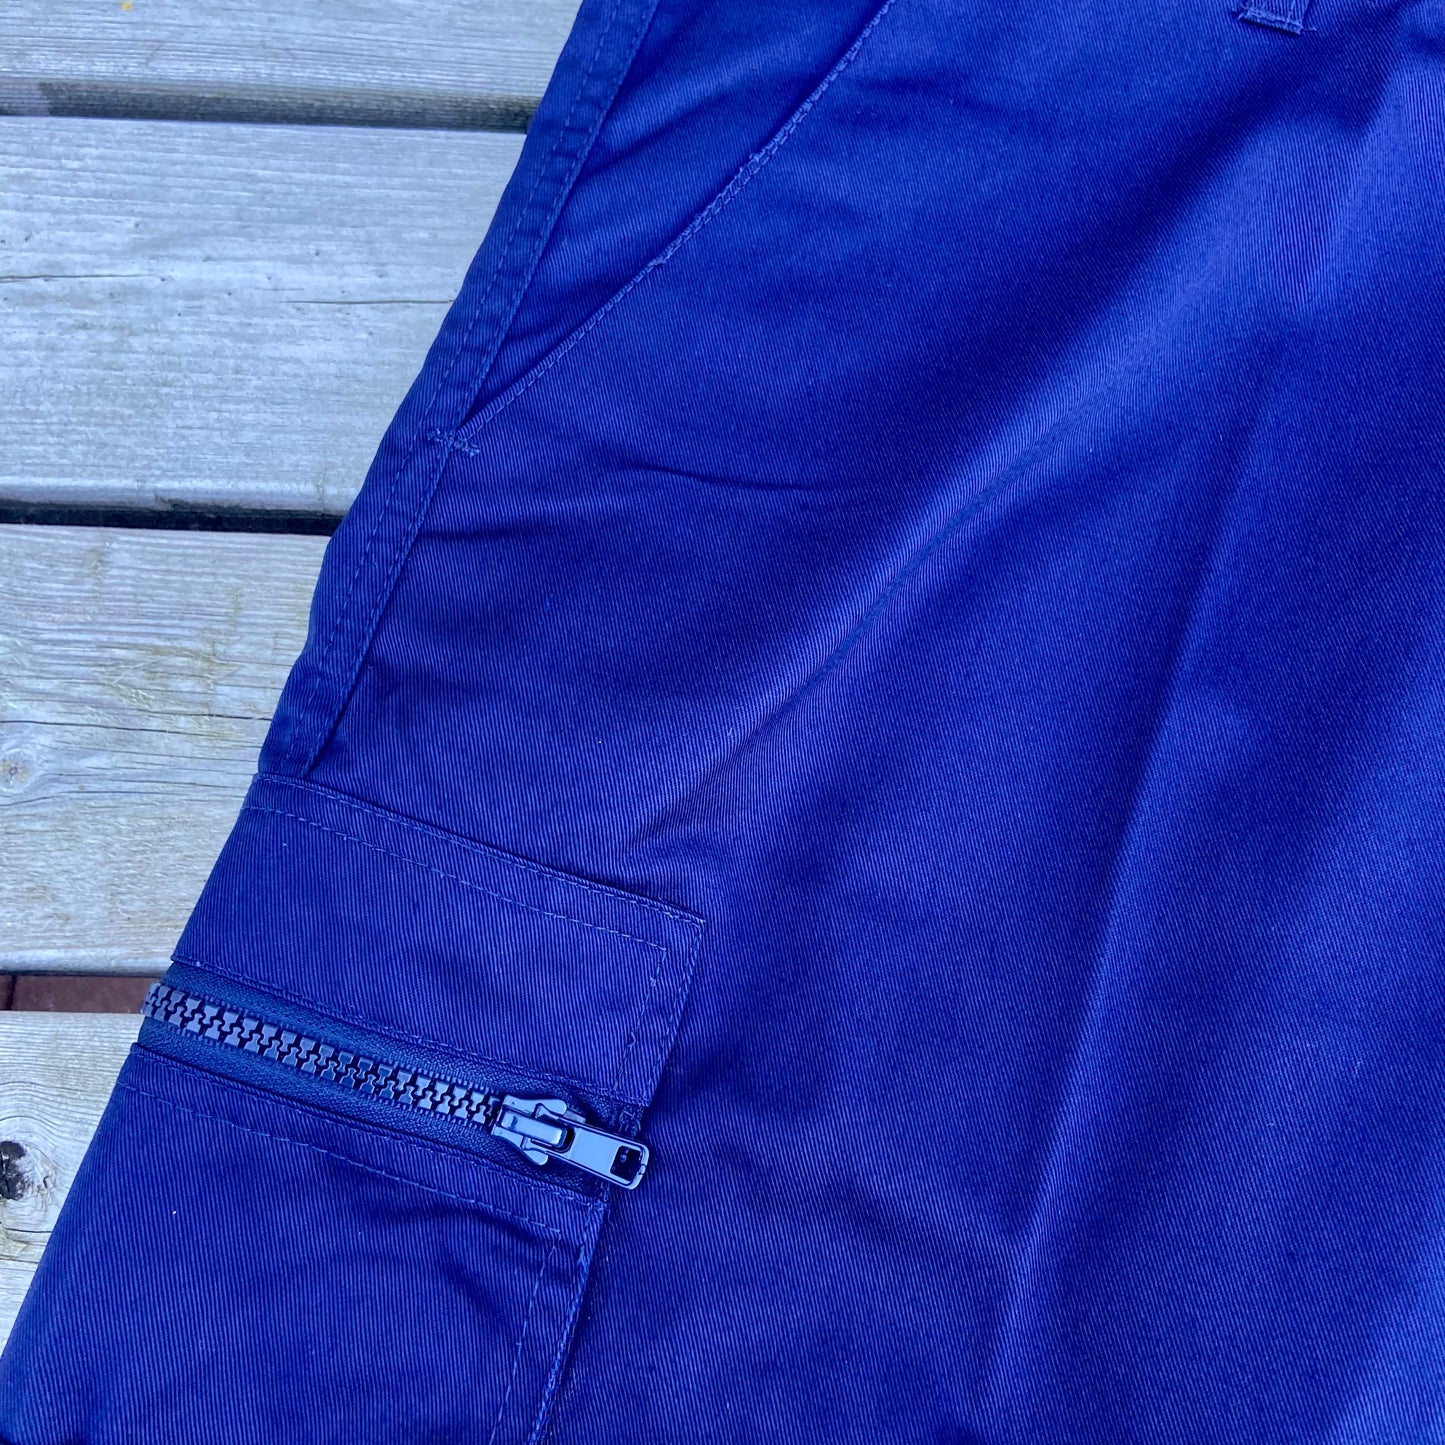 30" Portwest Action Trousers Navy